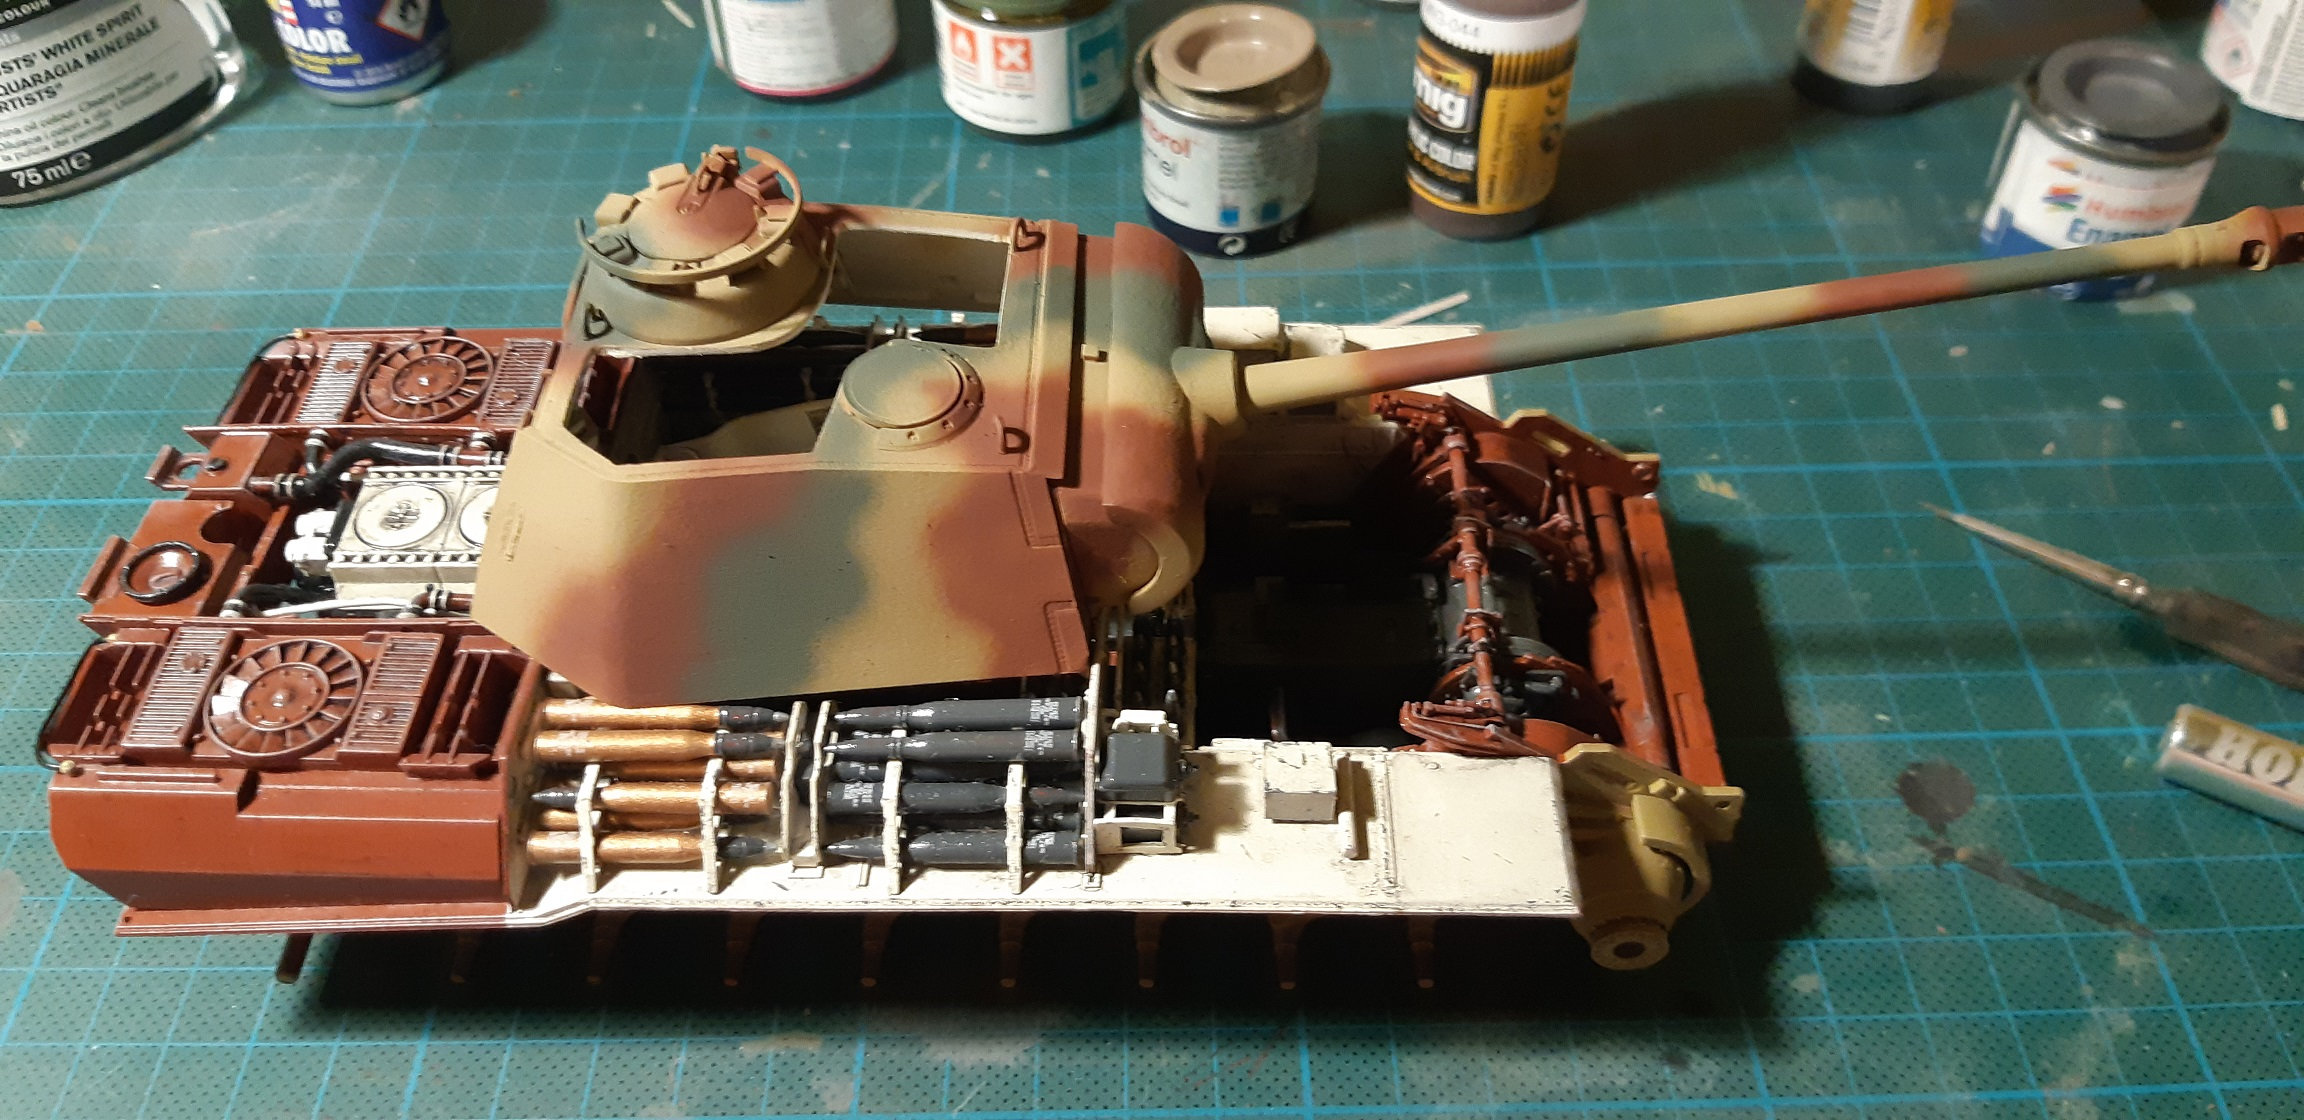 panther - Panther ausf.A Takom full interior 7dxq